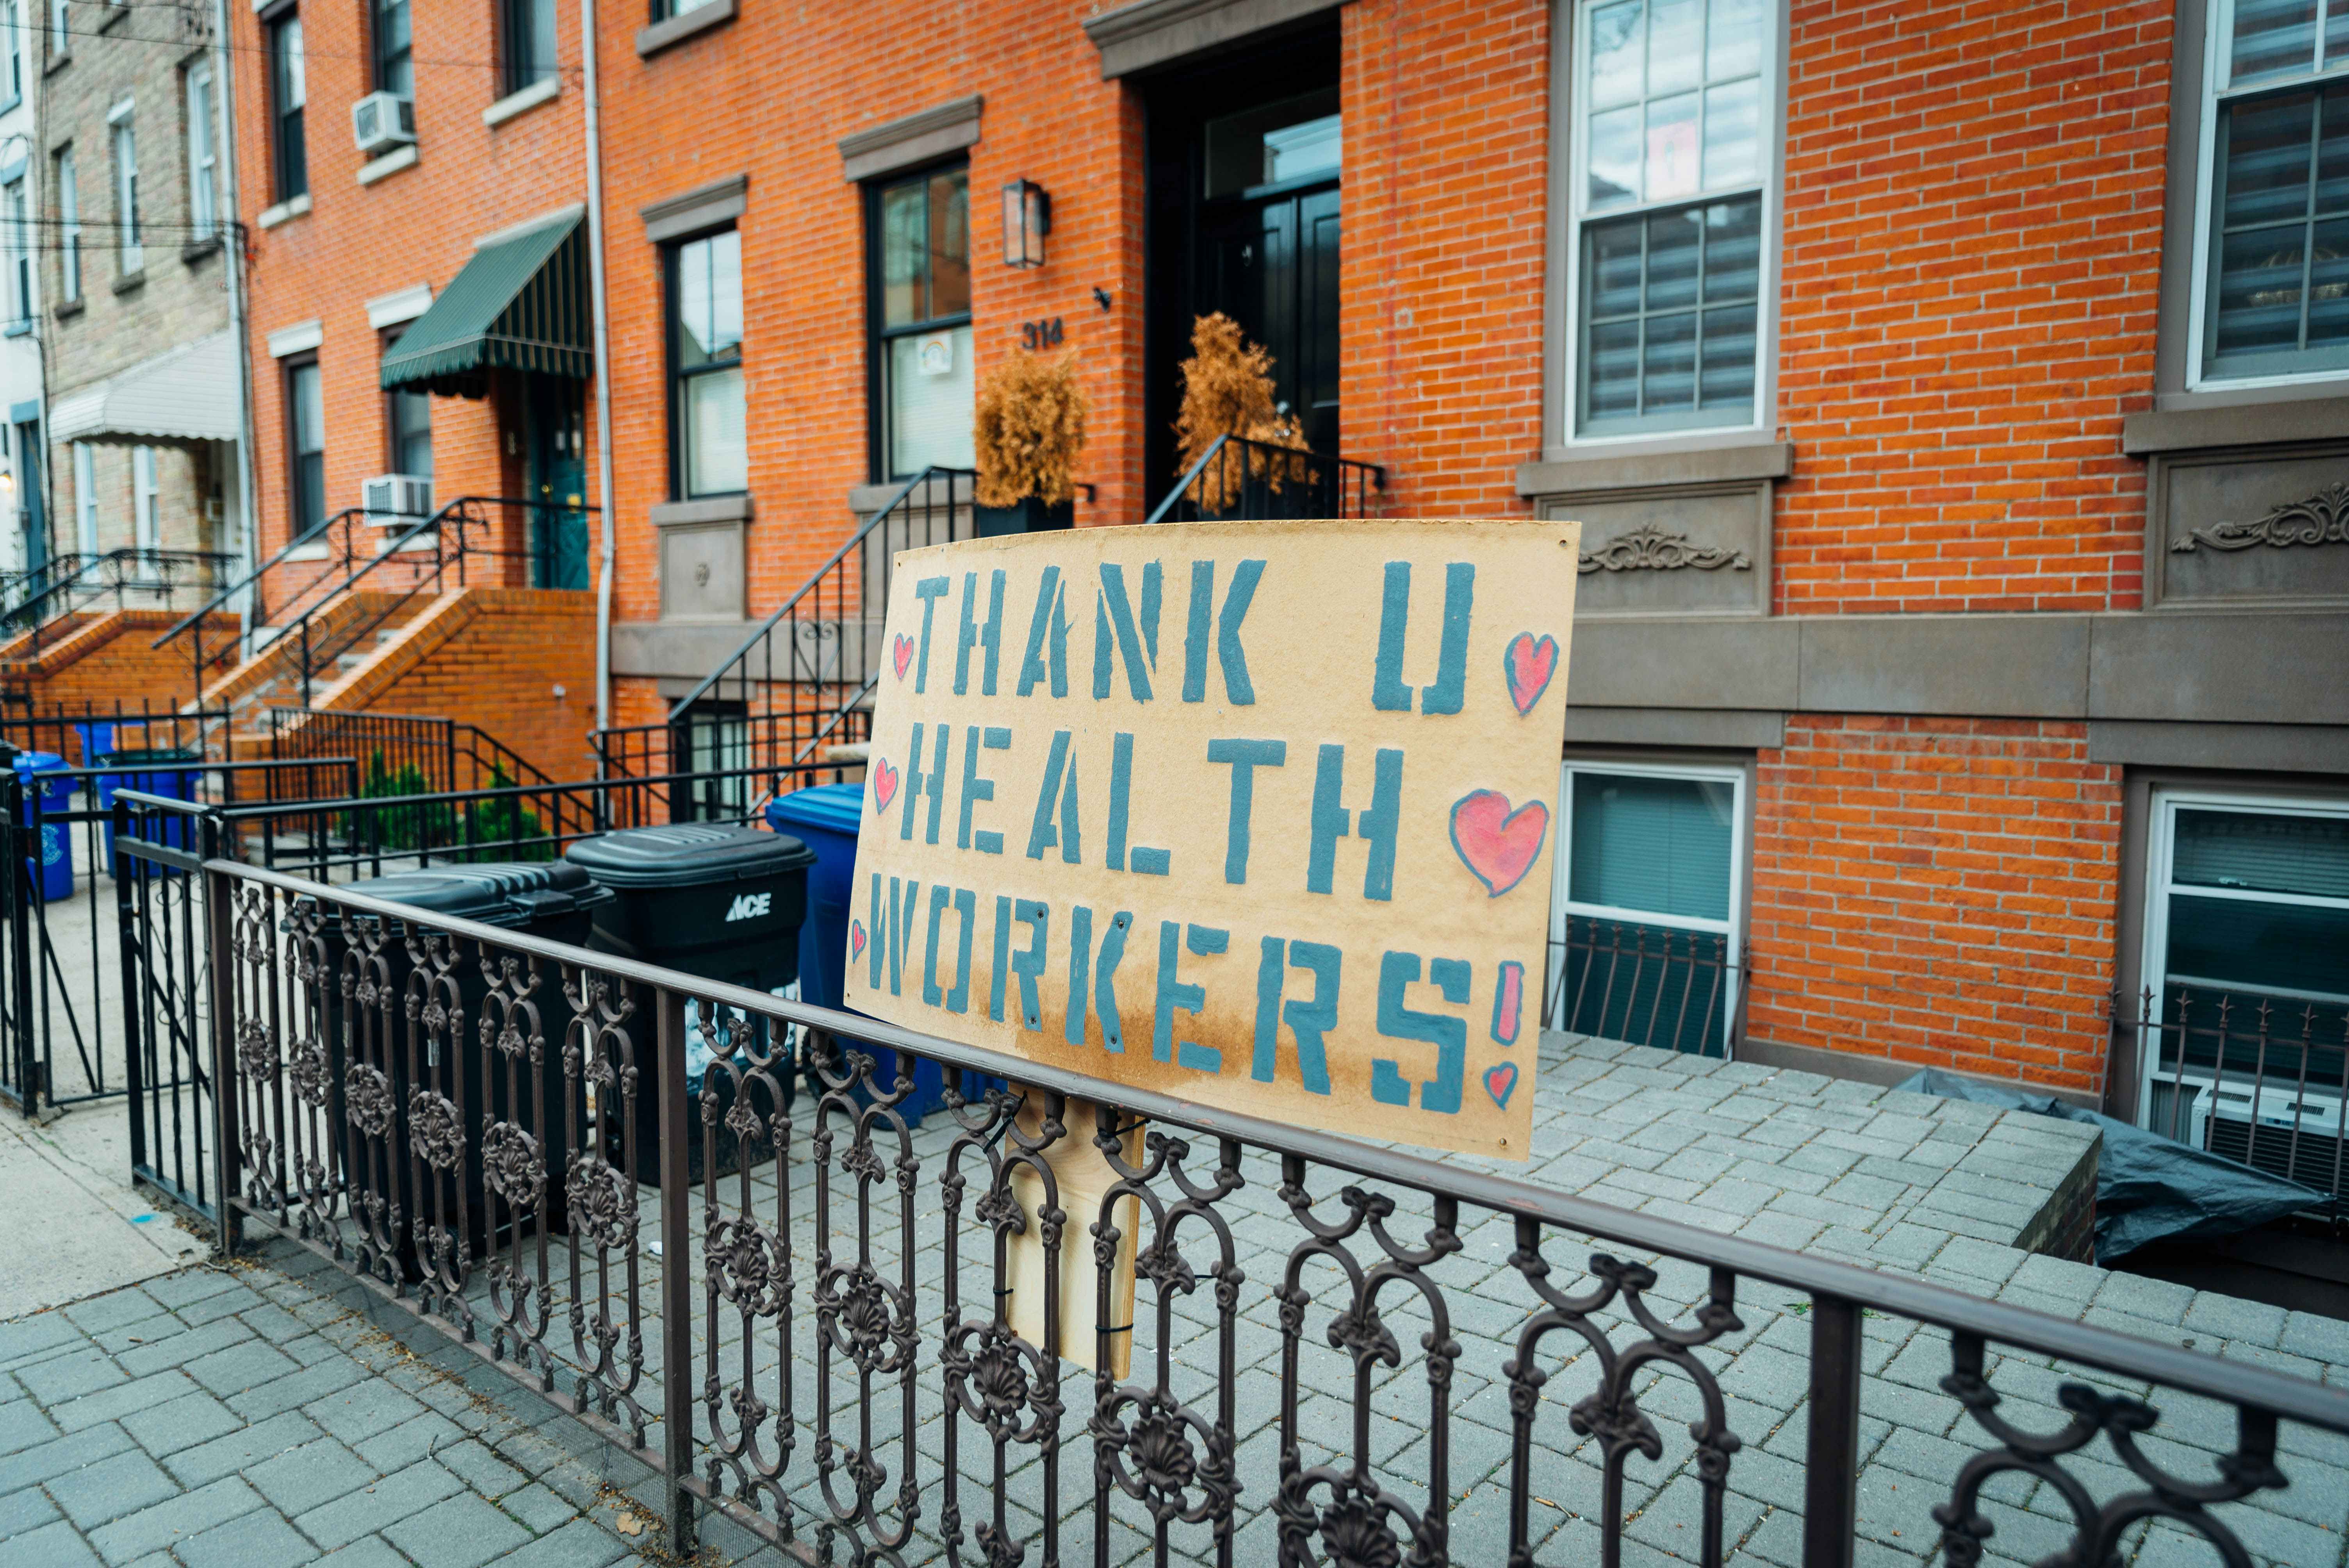 A "Thank U Health Workers" sign hung outside a city apartment building.